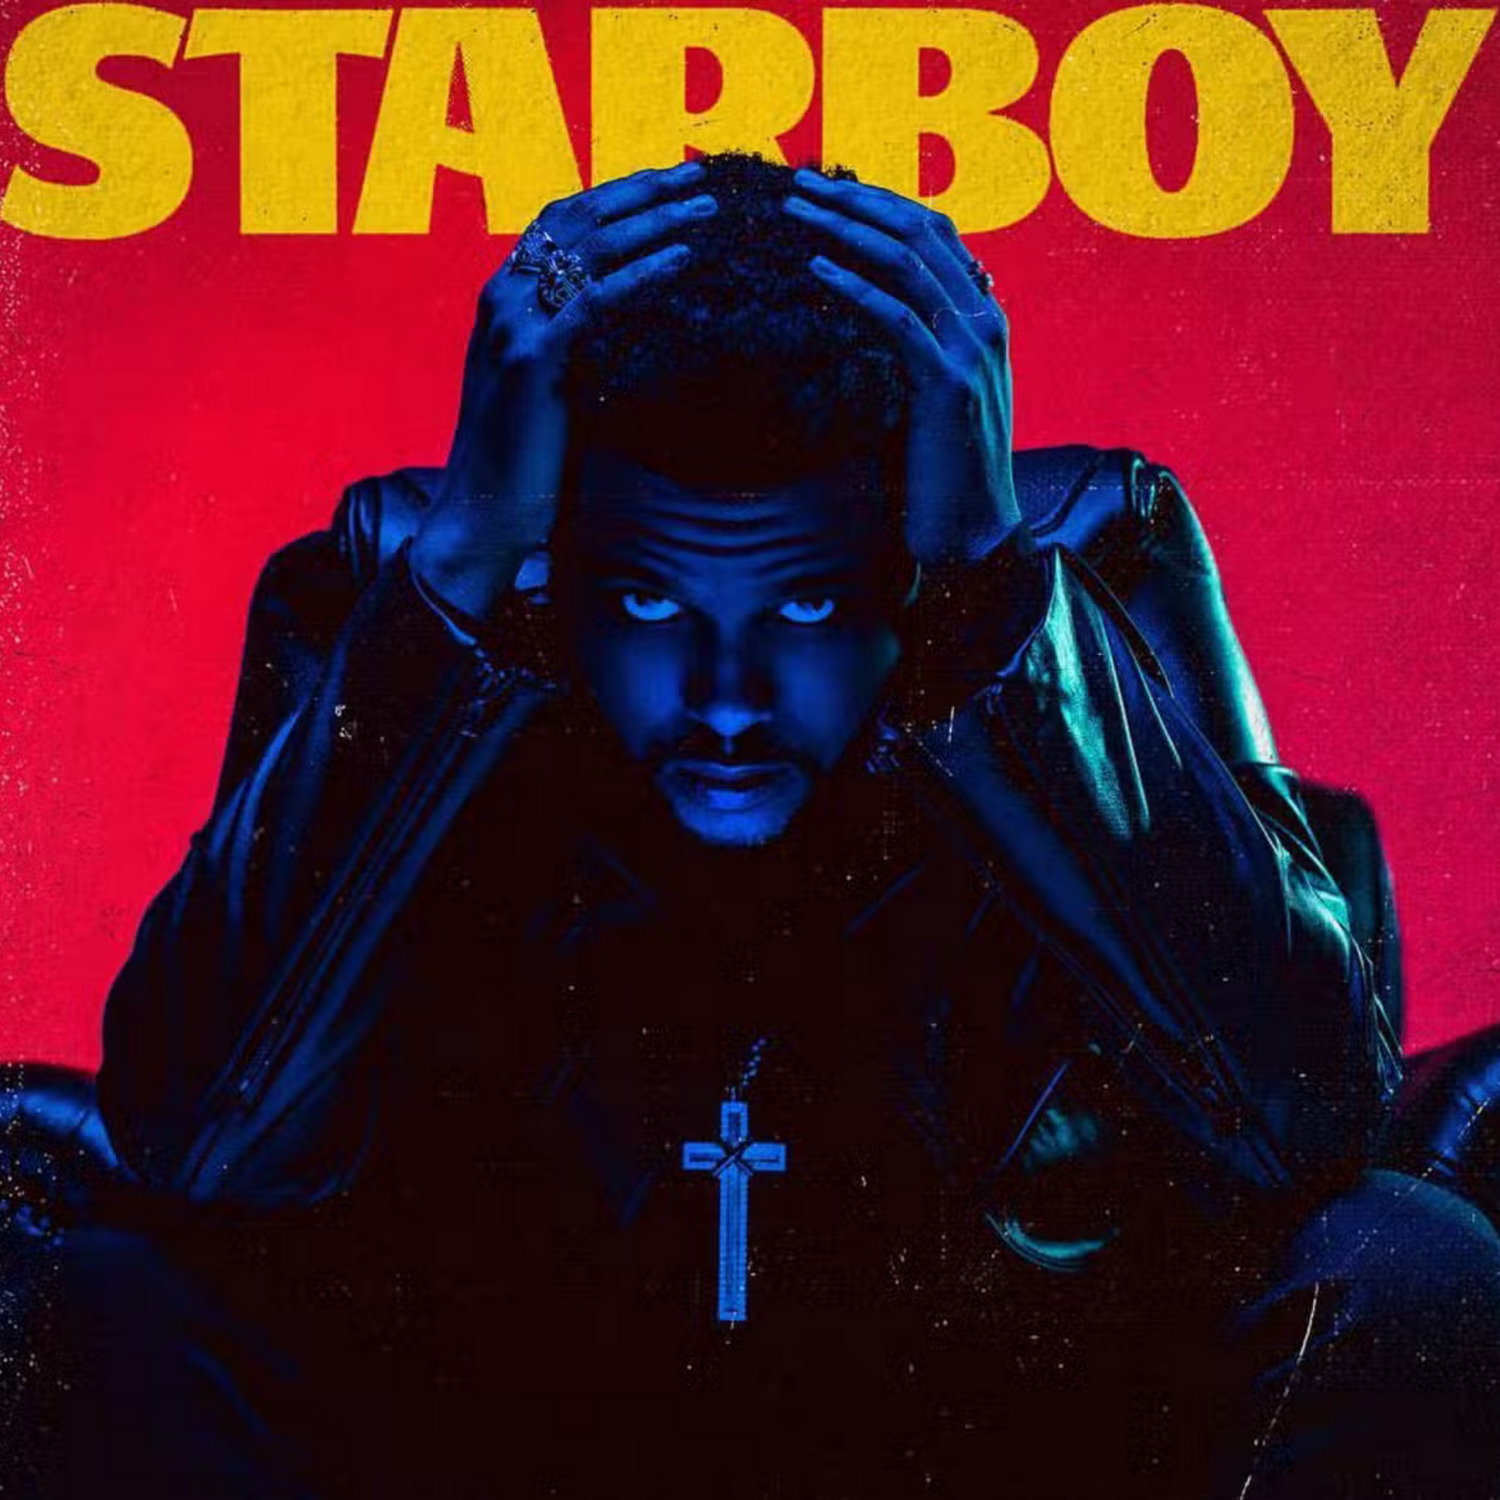 The Weeknd Starboy album cover